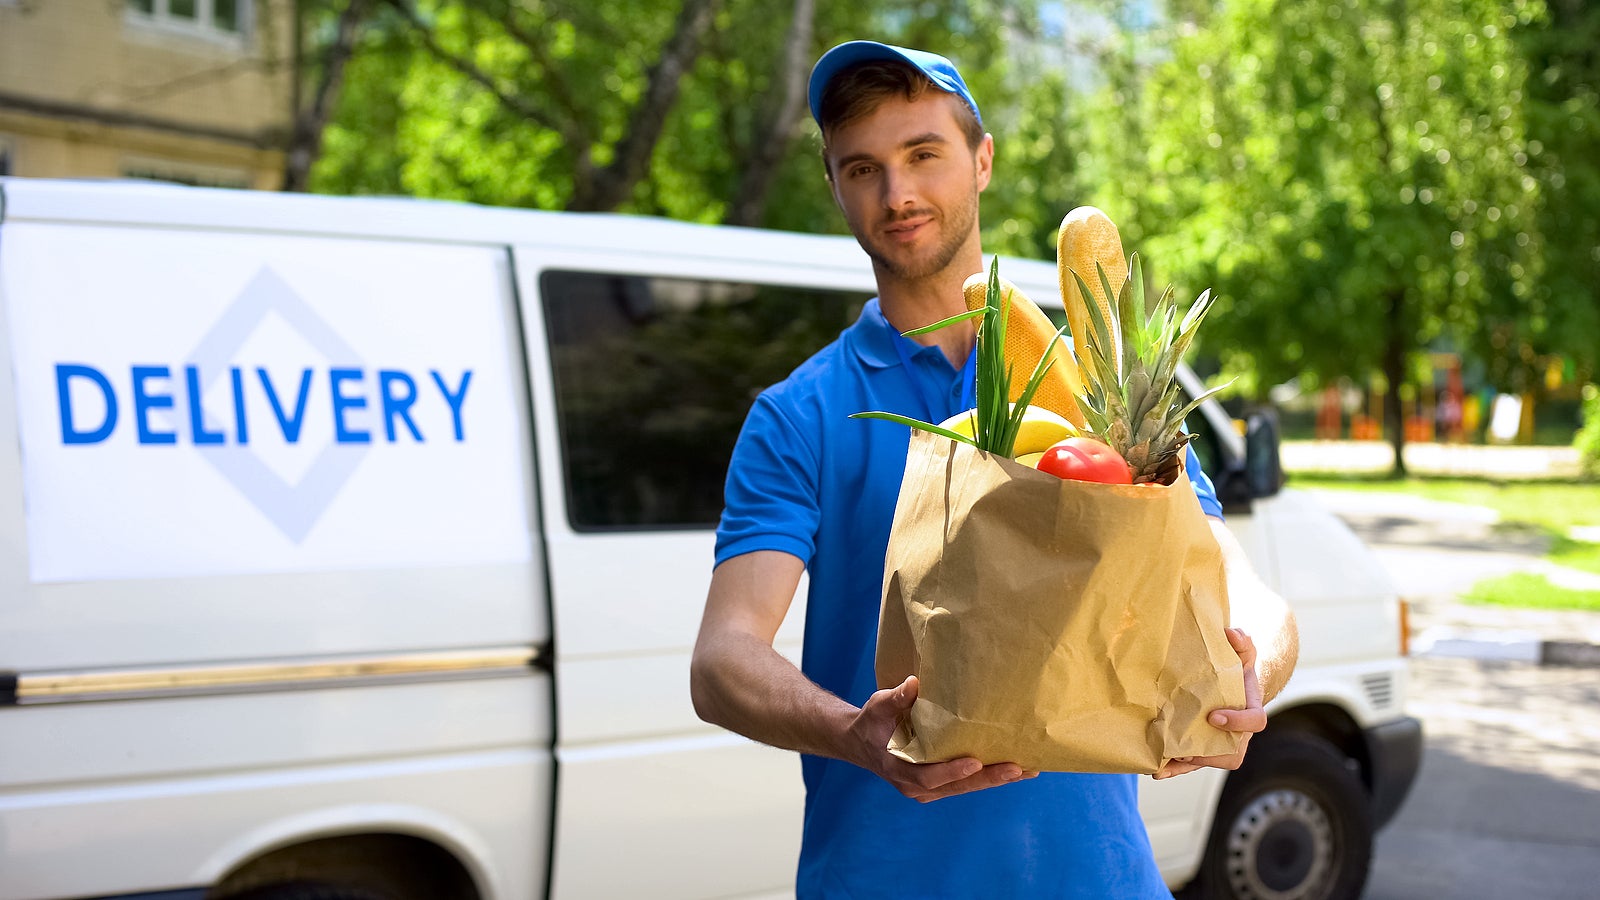 Want to Start an Online Food Delivery Business? Here’s How